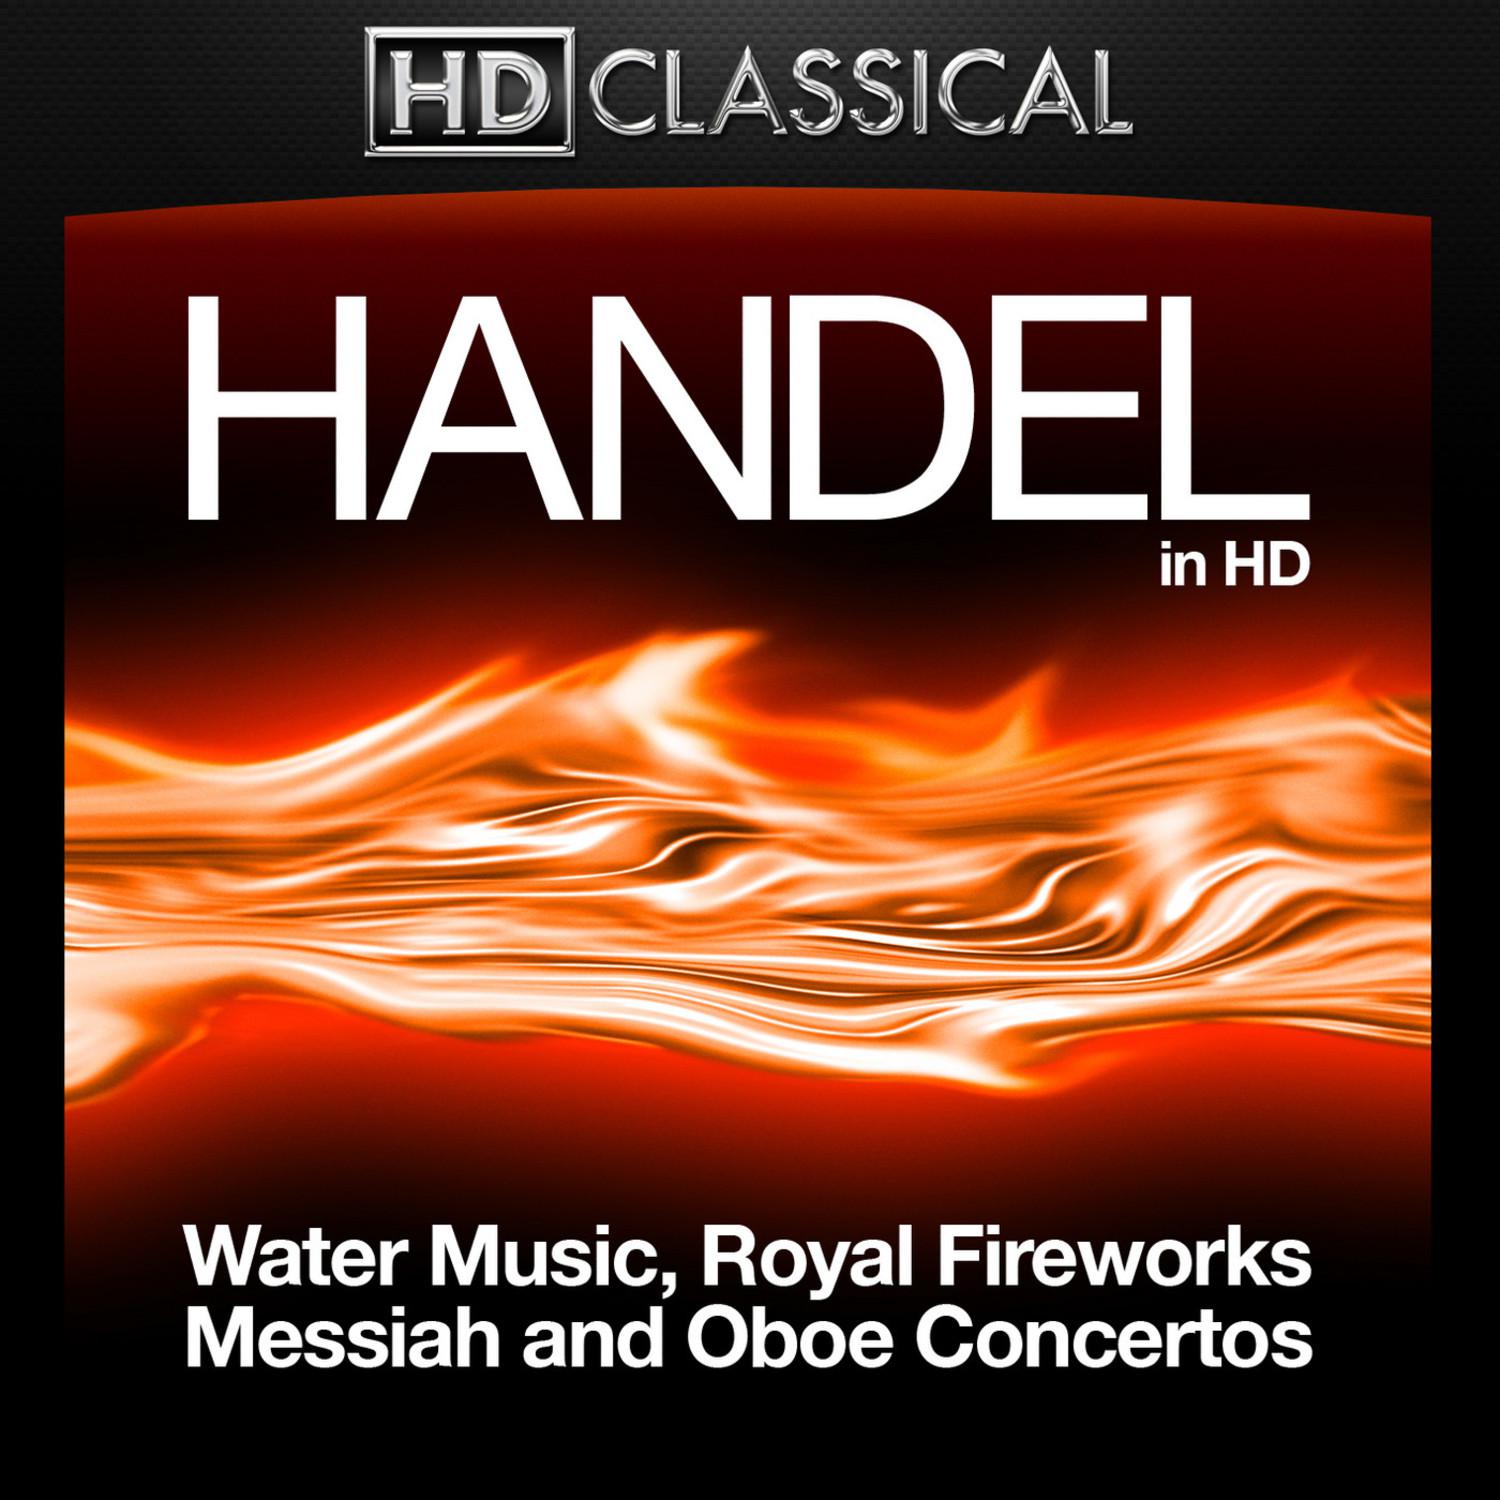 Water Music Suite No. 3 in G Major, HWV 350: I. Minuet